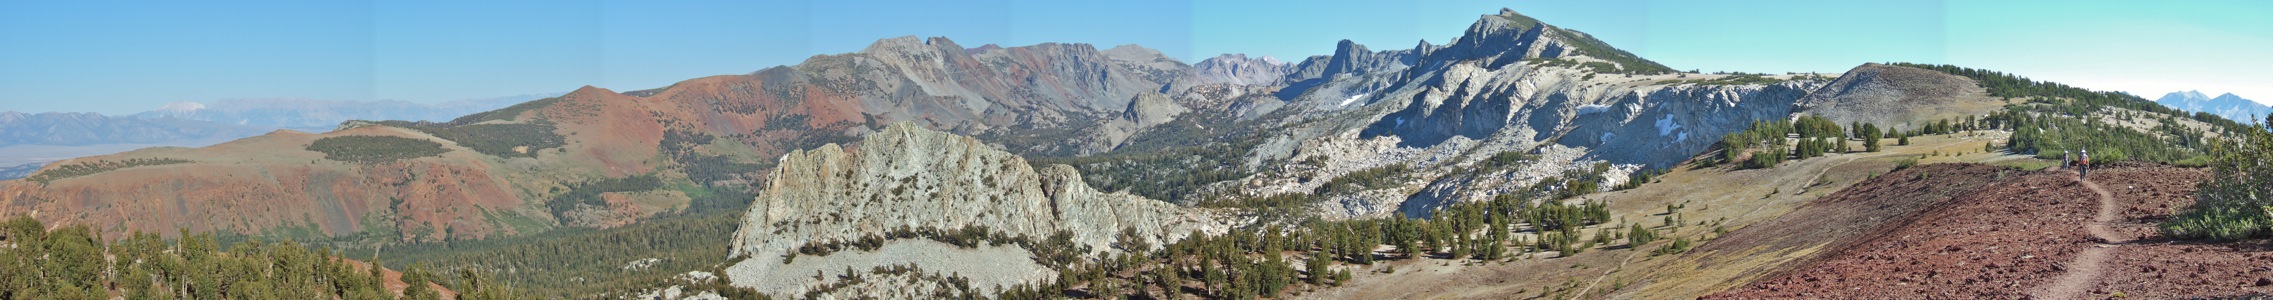 Sherwin Crest and Mammoth Crest - 9/2010